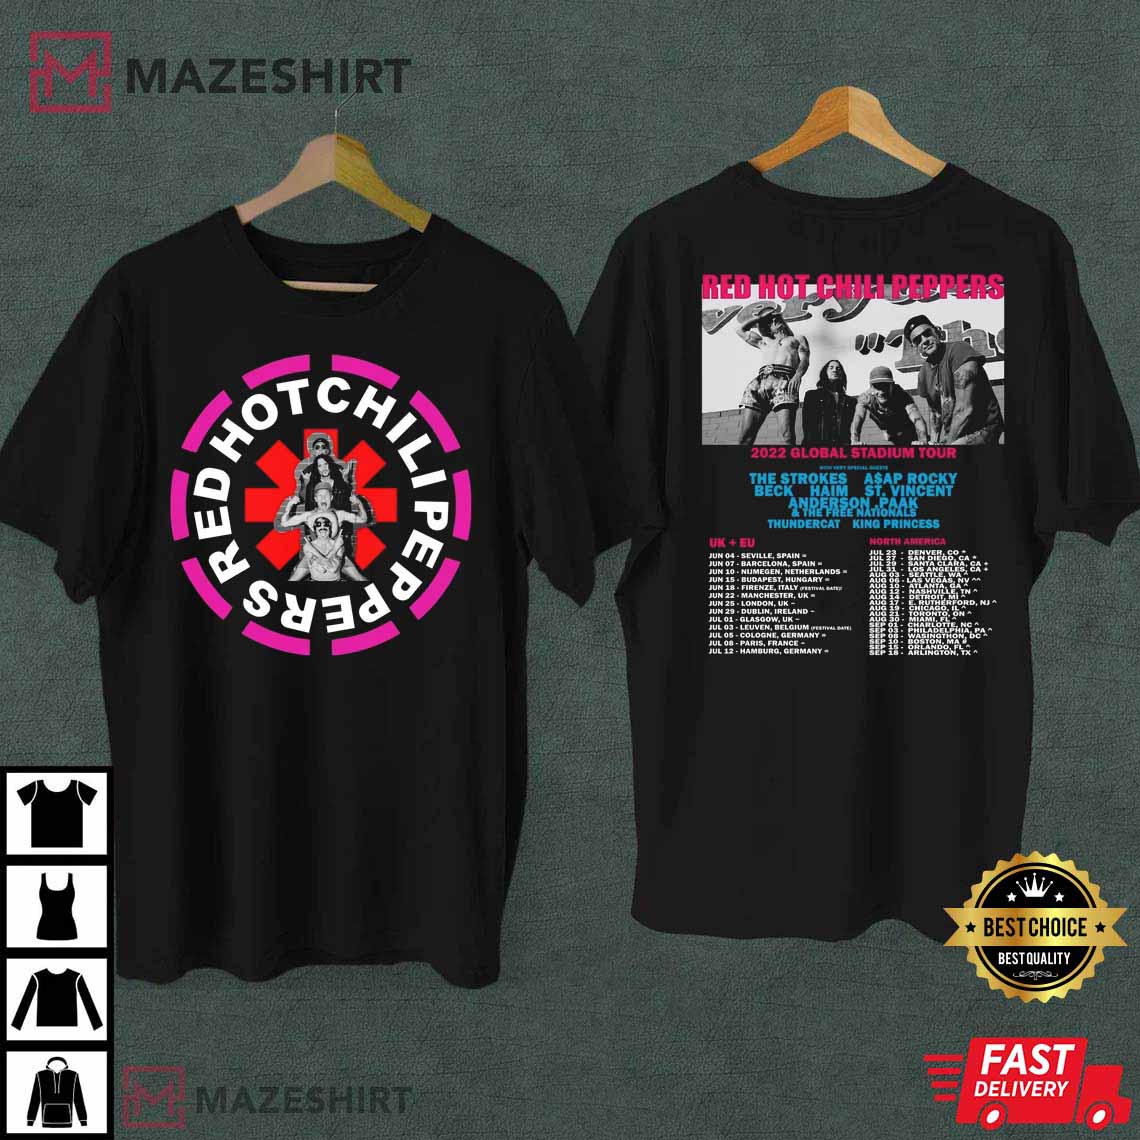 Red Hot Chili Peppers World Tour 2022 Exclusive T-Shirt